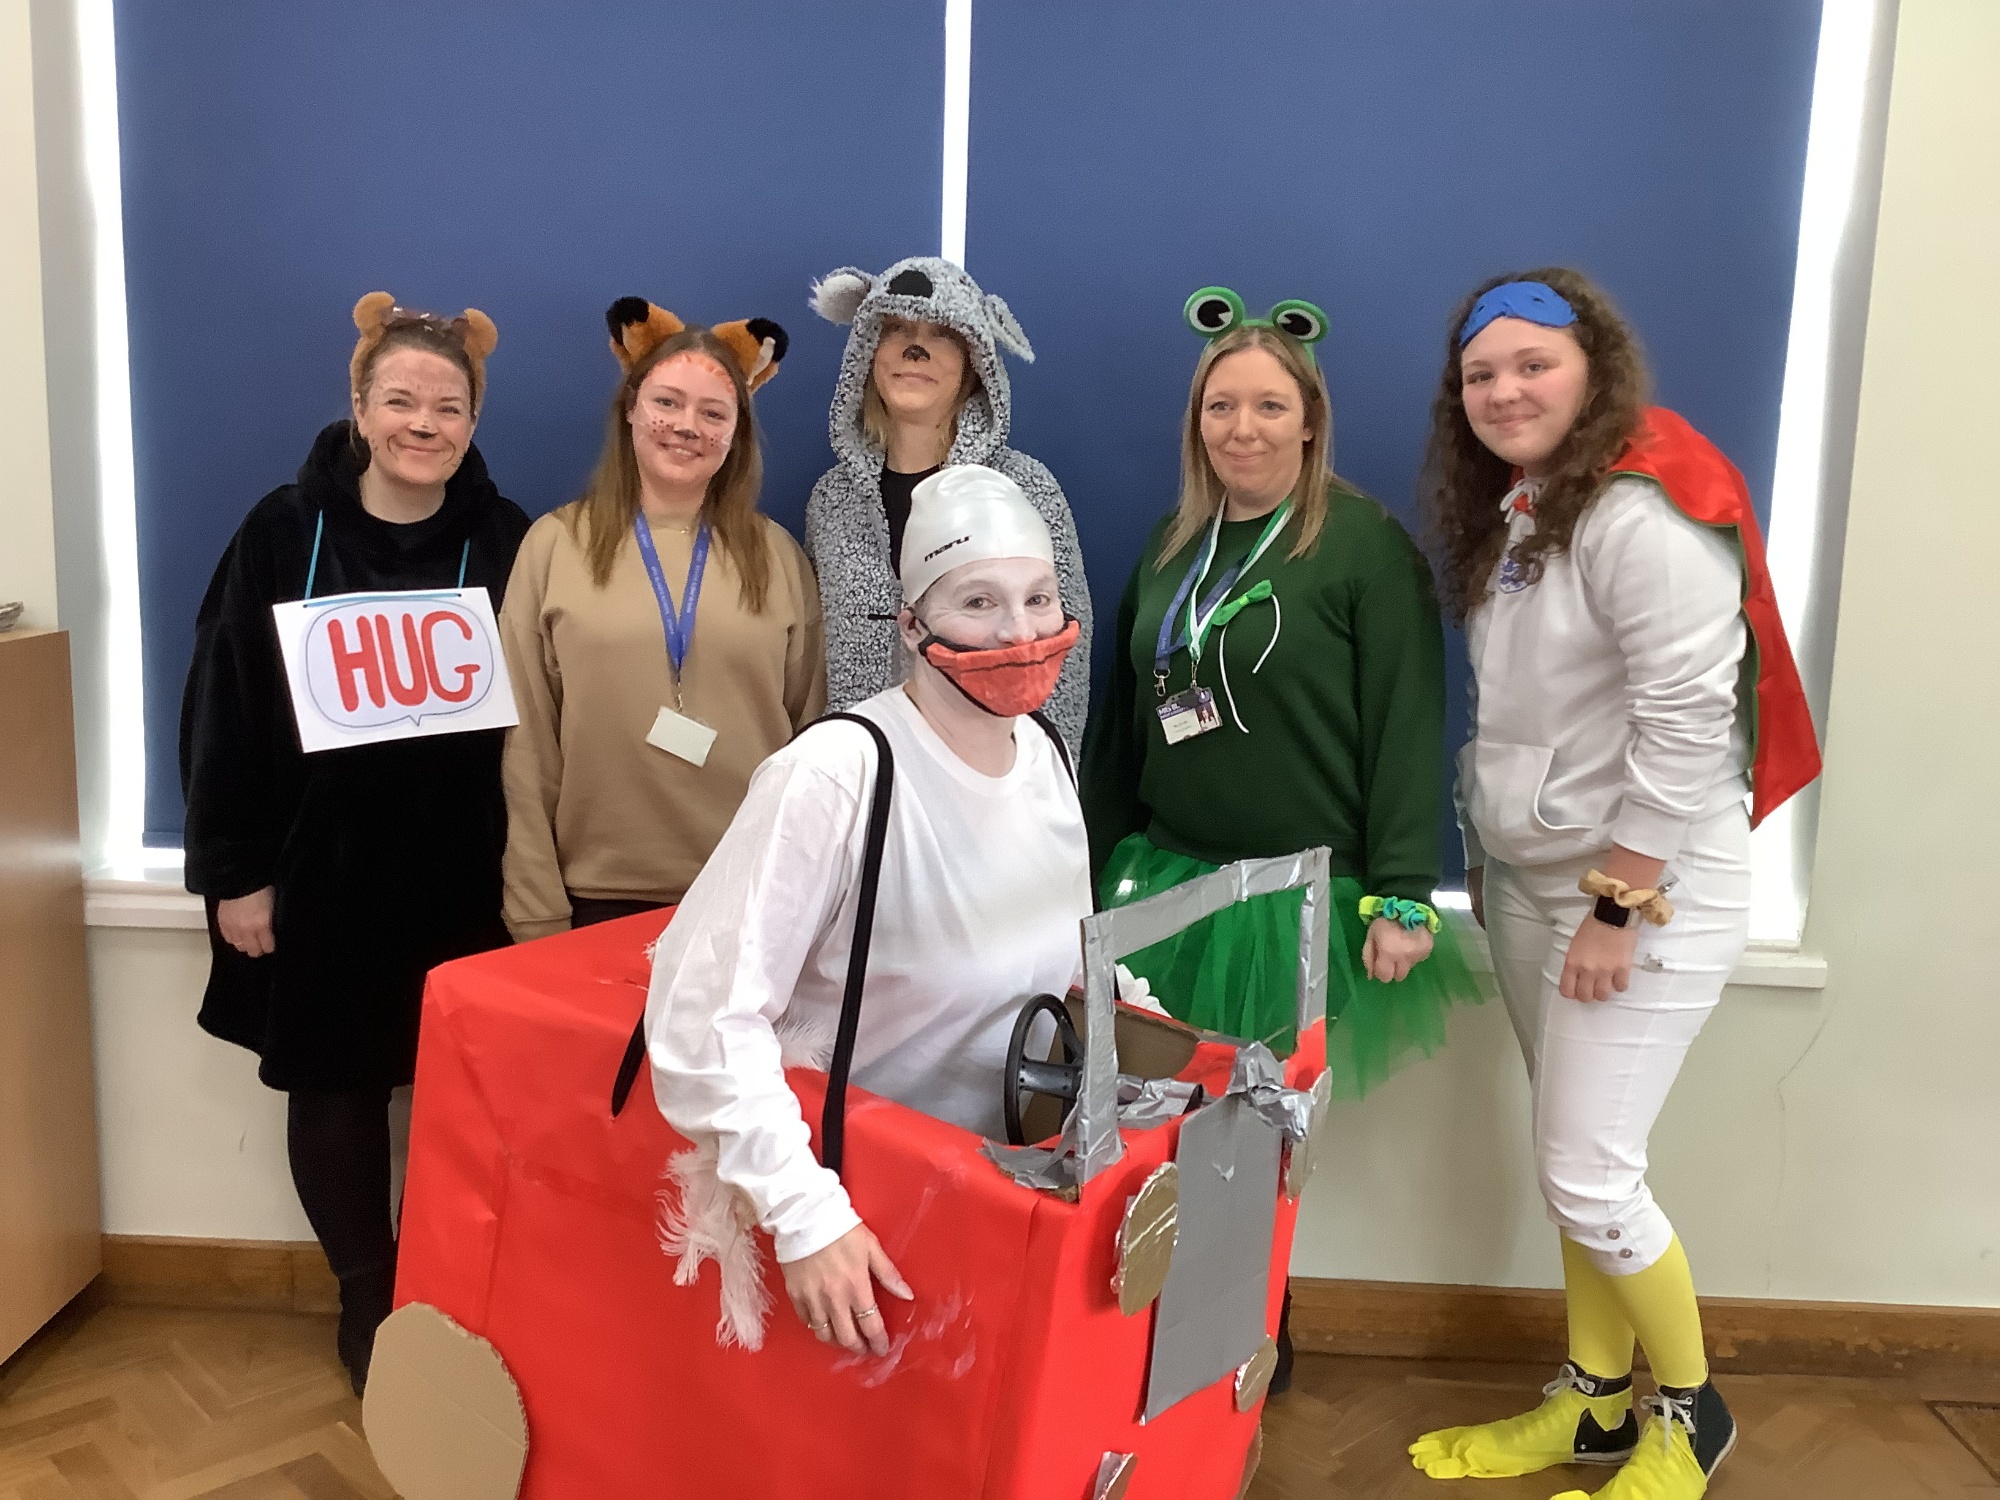 Staff in costume for World Book Day 24